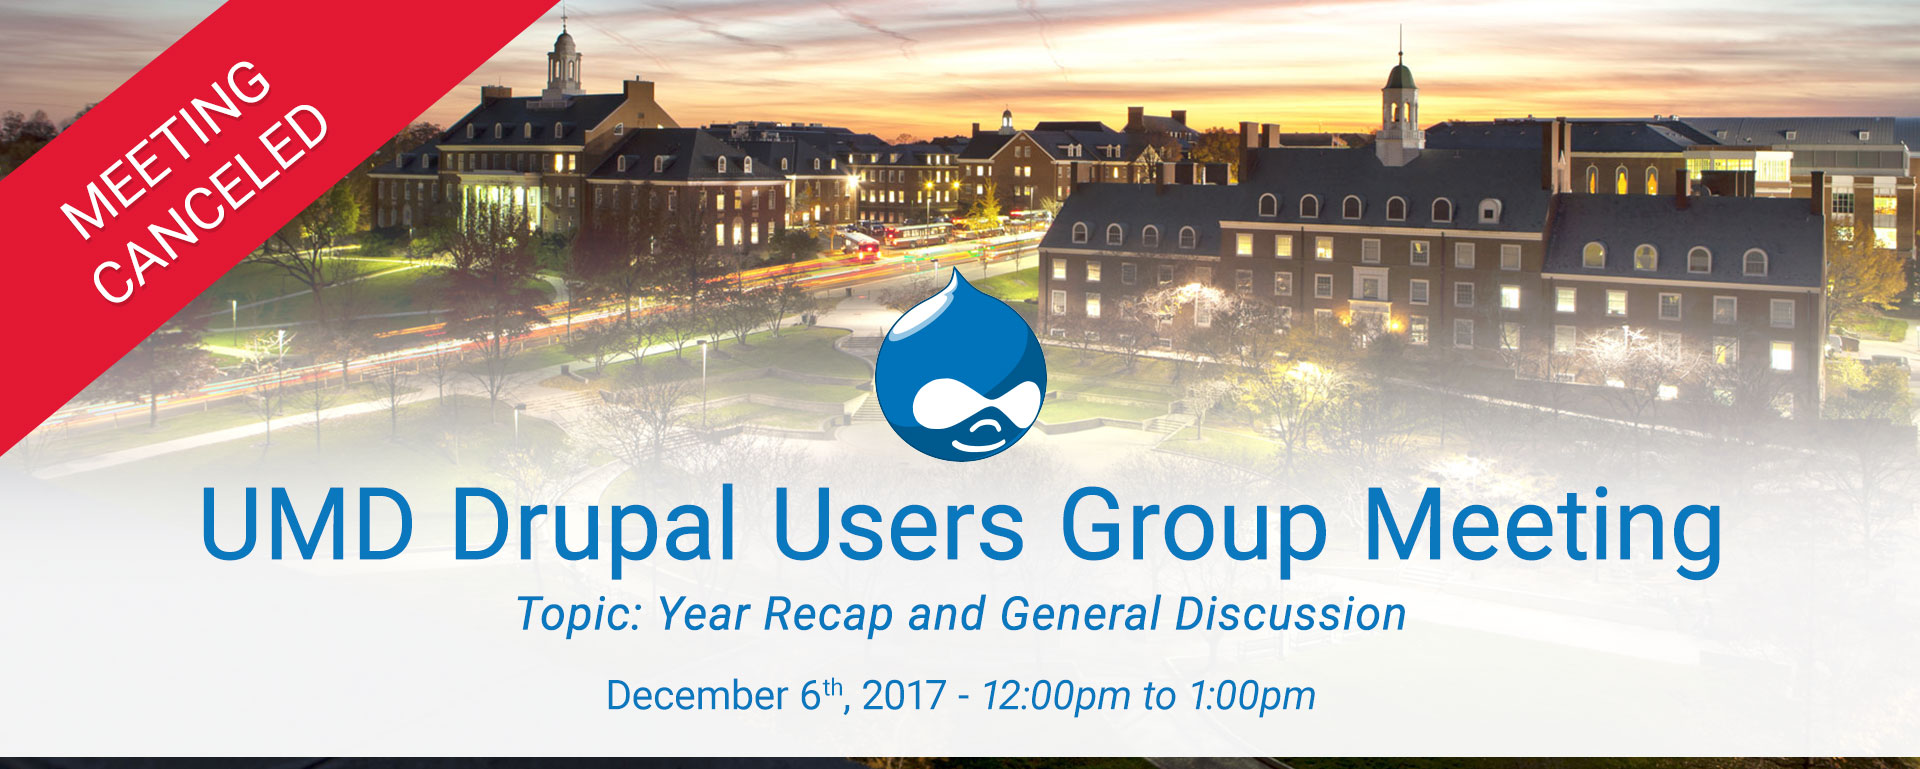 Drupal Users Meeting - End year 2017